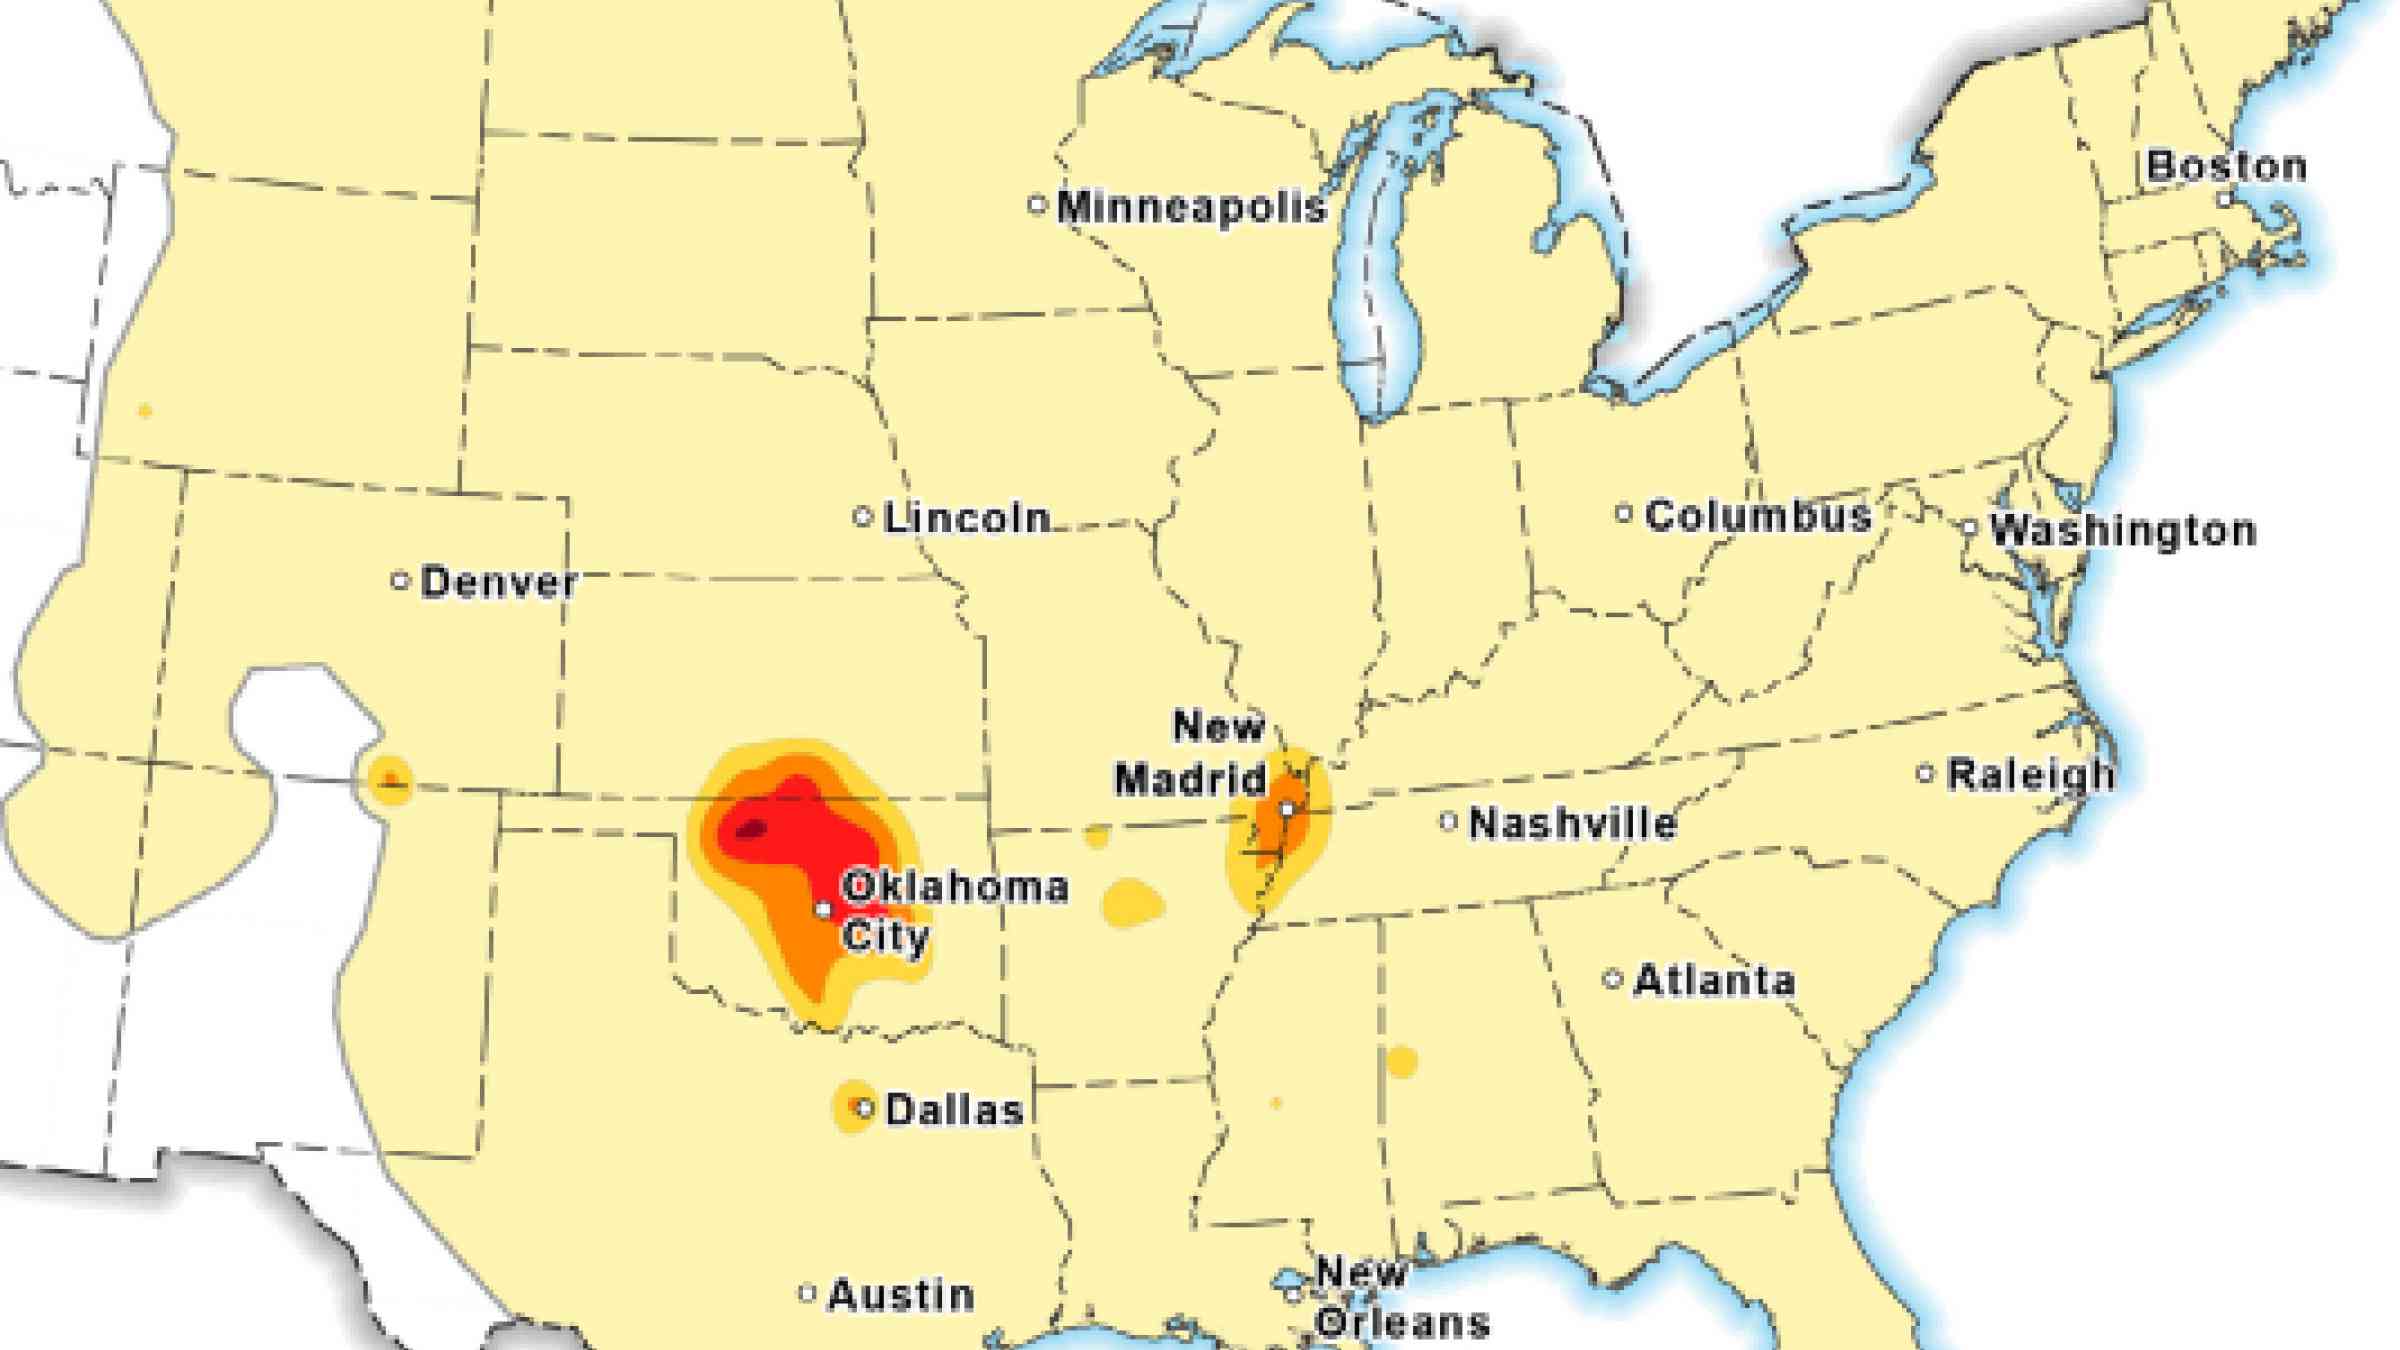 Map showing chance of damage from an earthquake in the Central and Eastern United States during 2016. U.S. Geological Survey